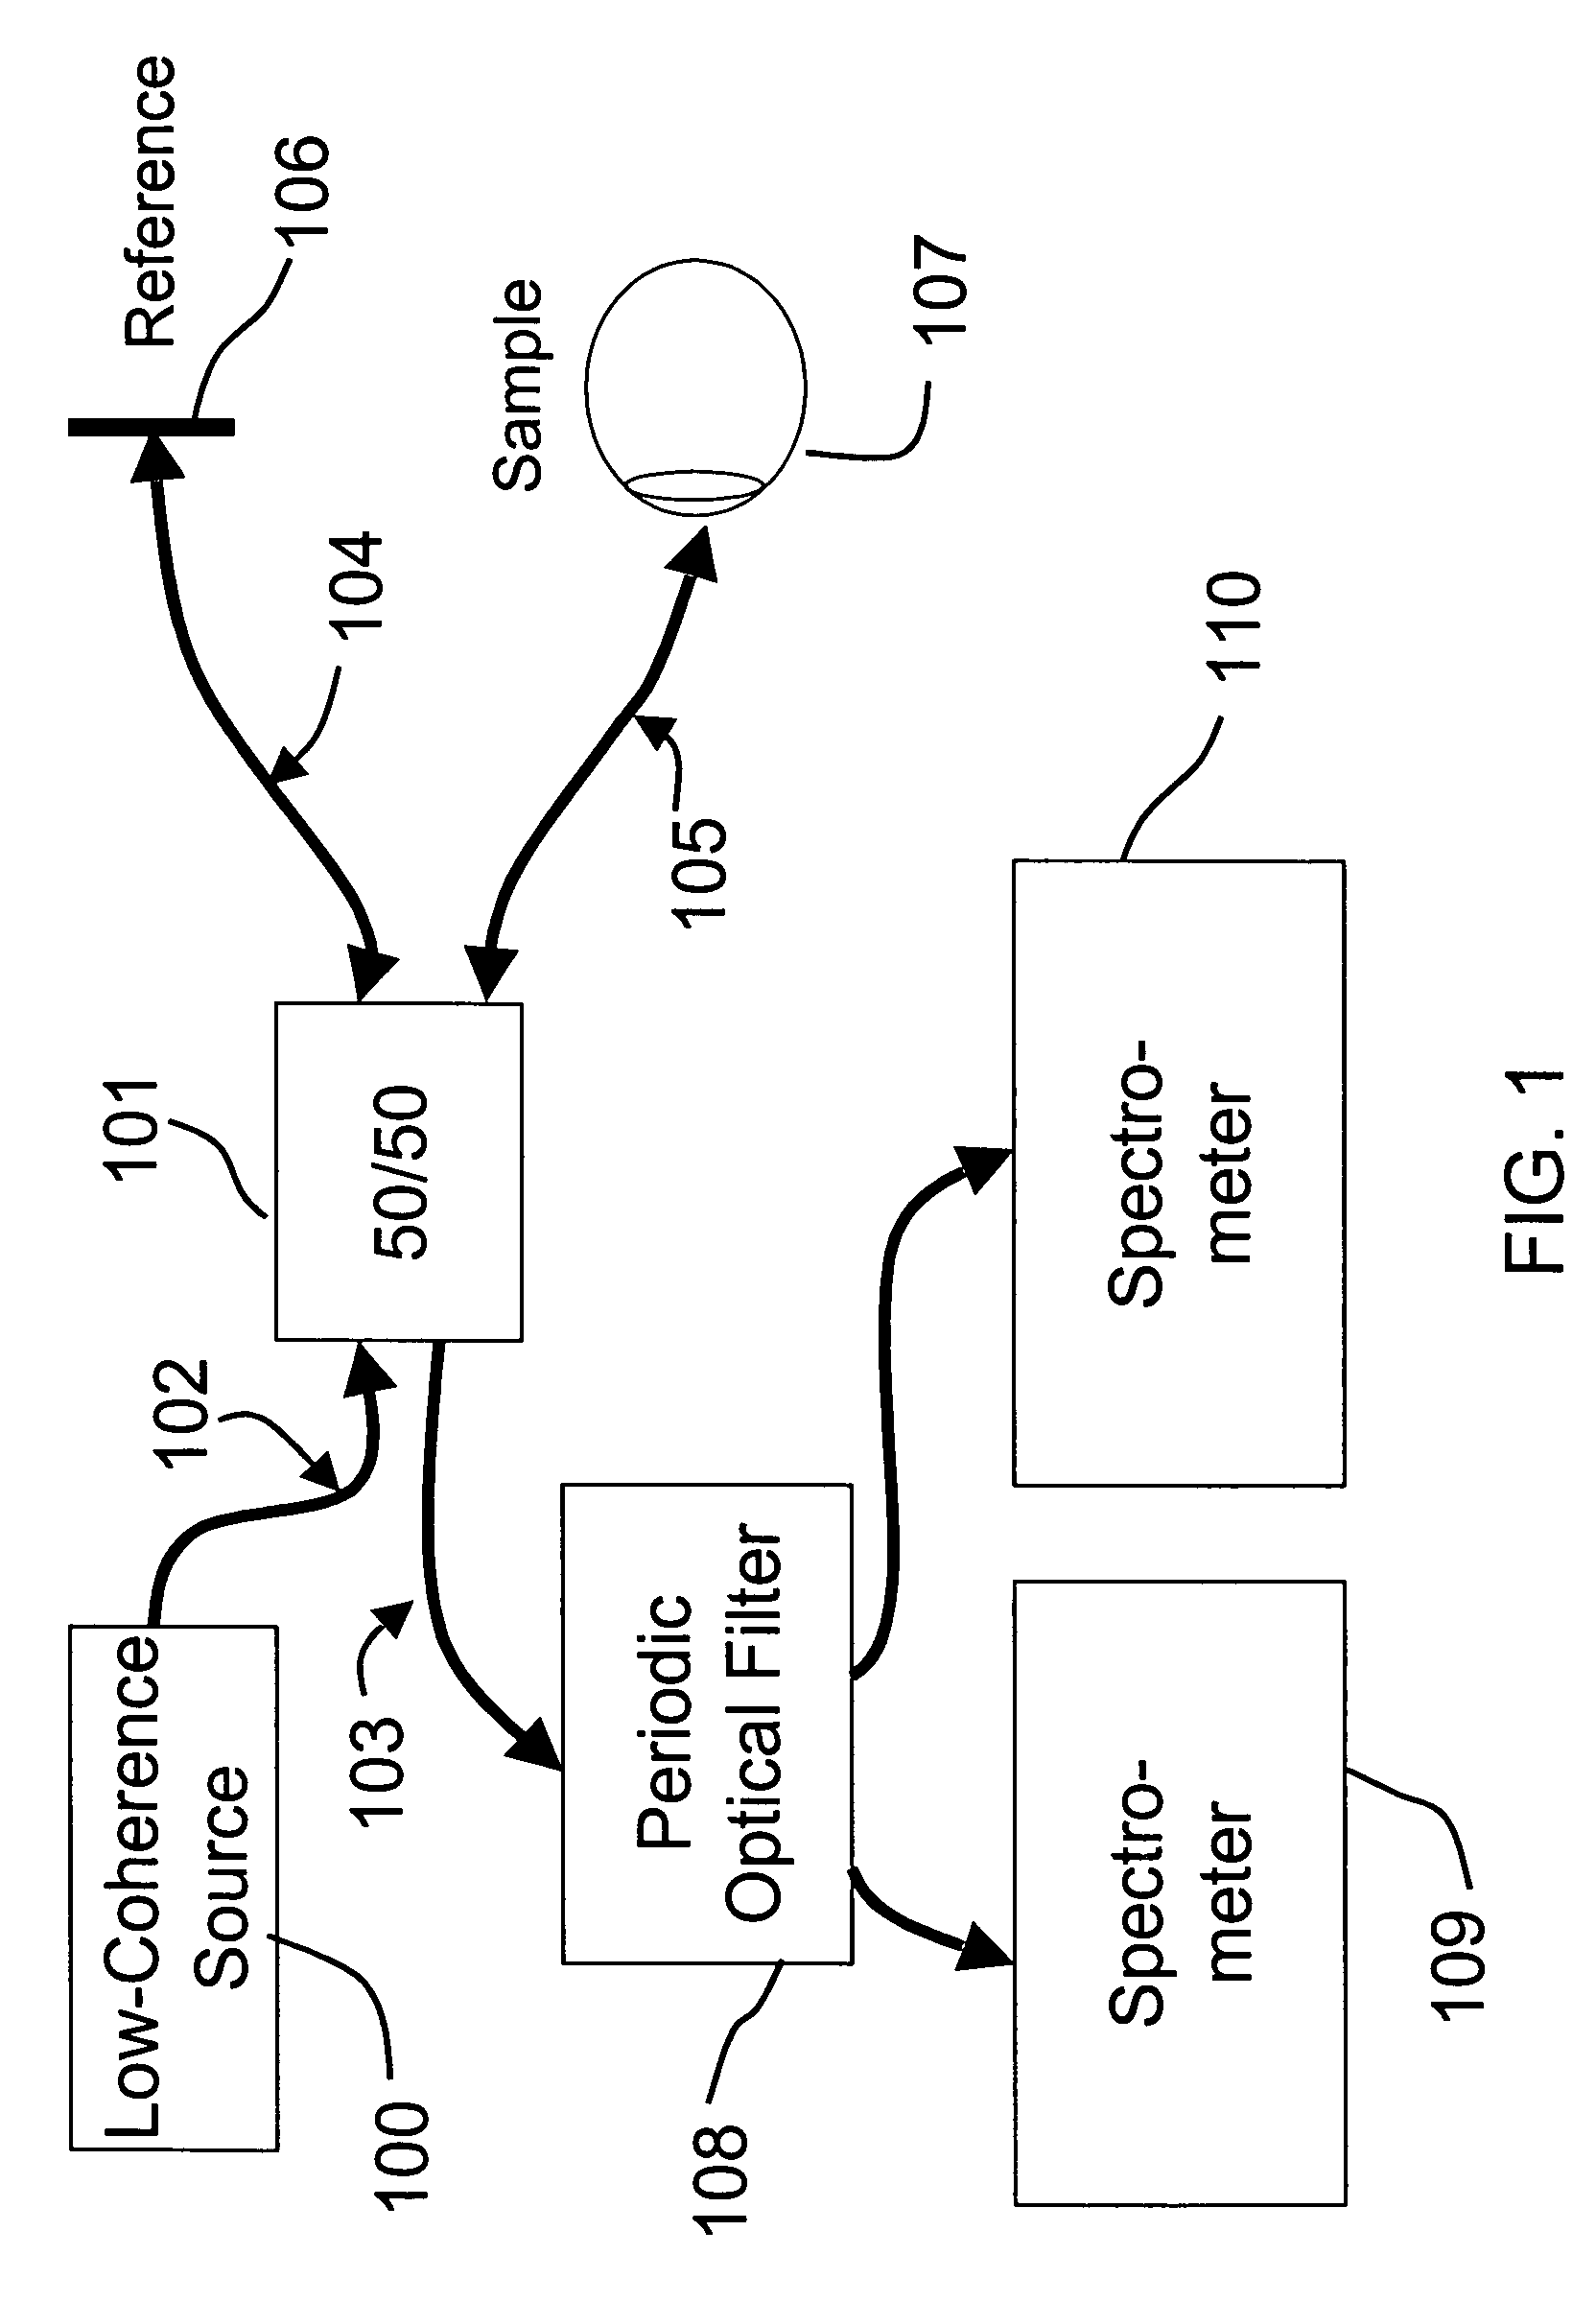 Optical coherence imaging systems having a reduced effective linewidth and methods of using the same